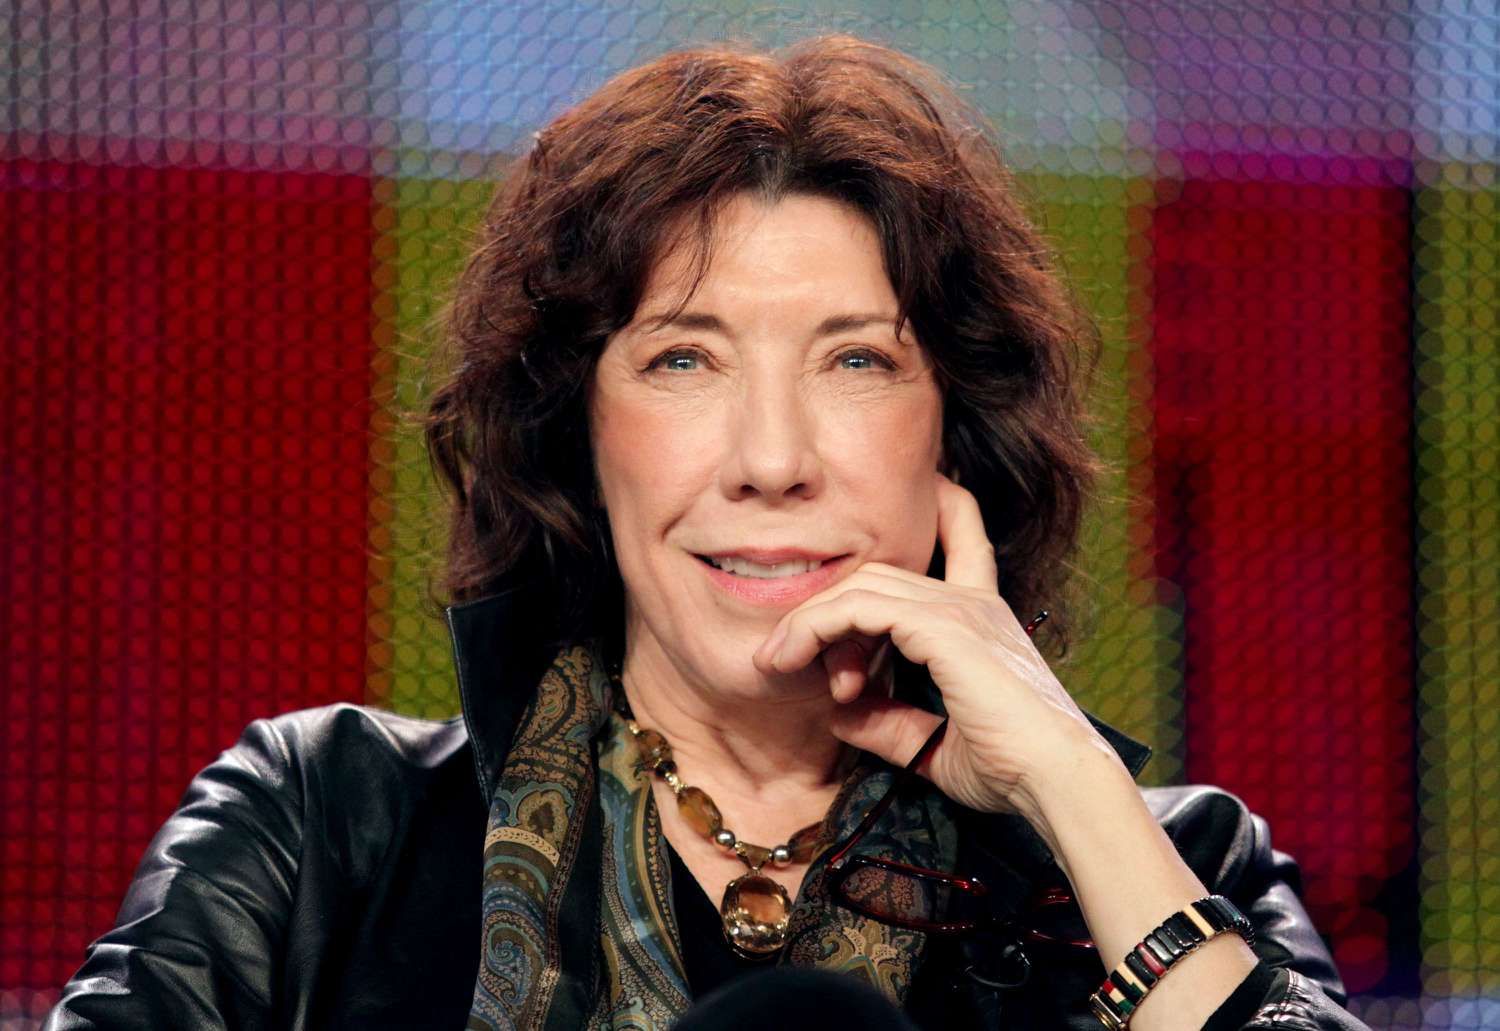 Lily Tomlin on Jennifer Aniston’s 9 to 5 Remake: ‘Working World Has Changed’ [Video]